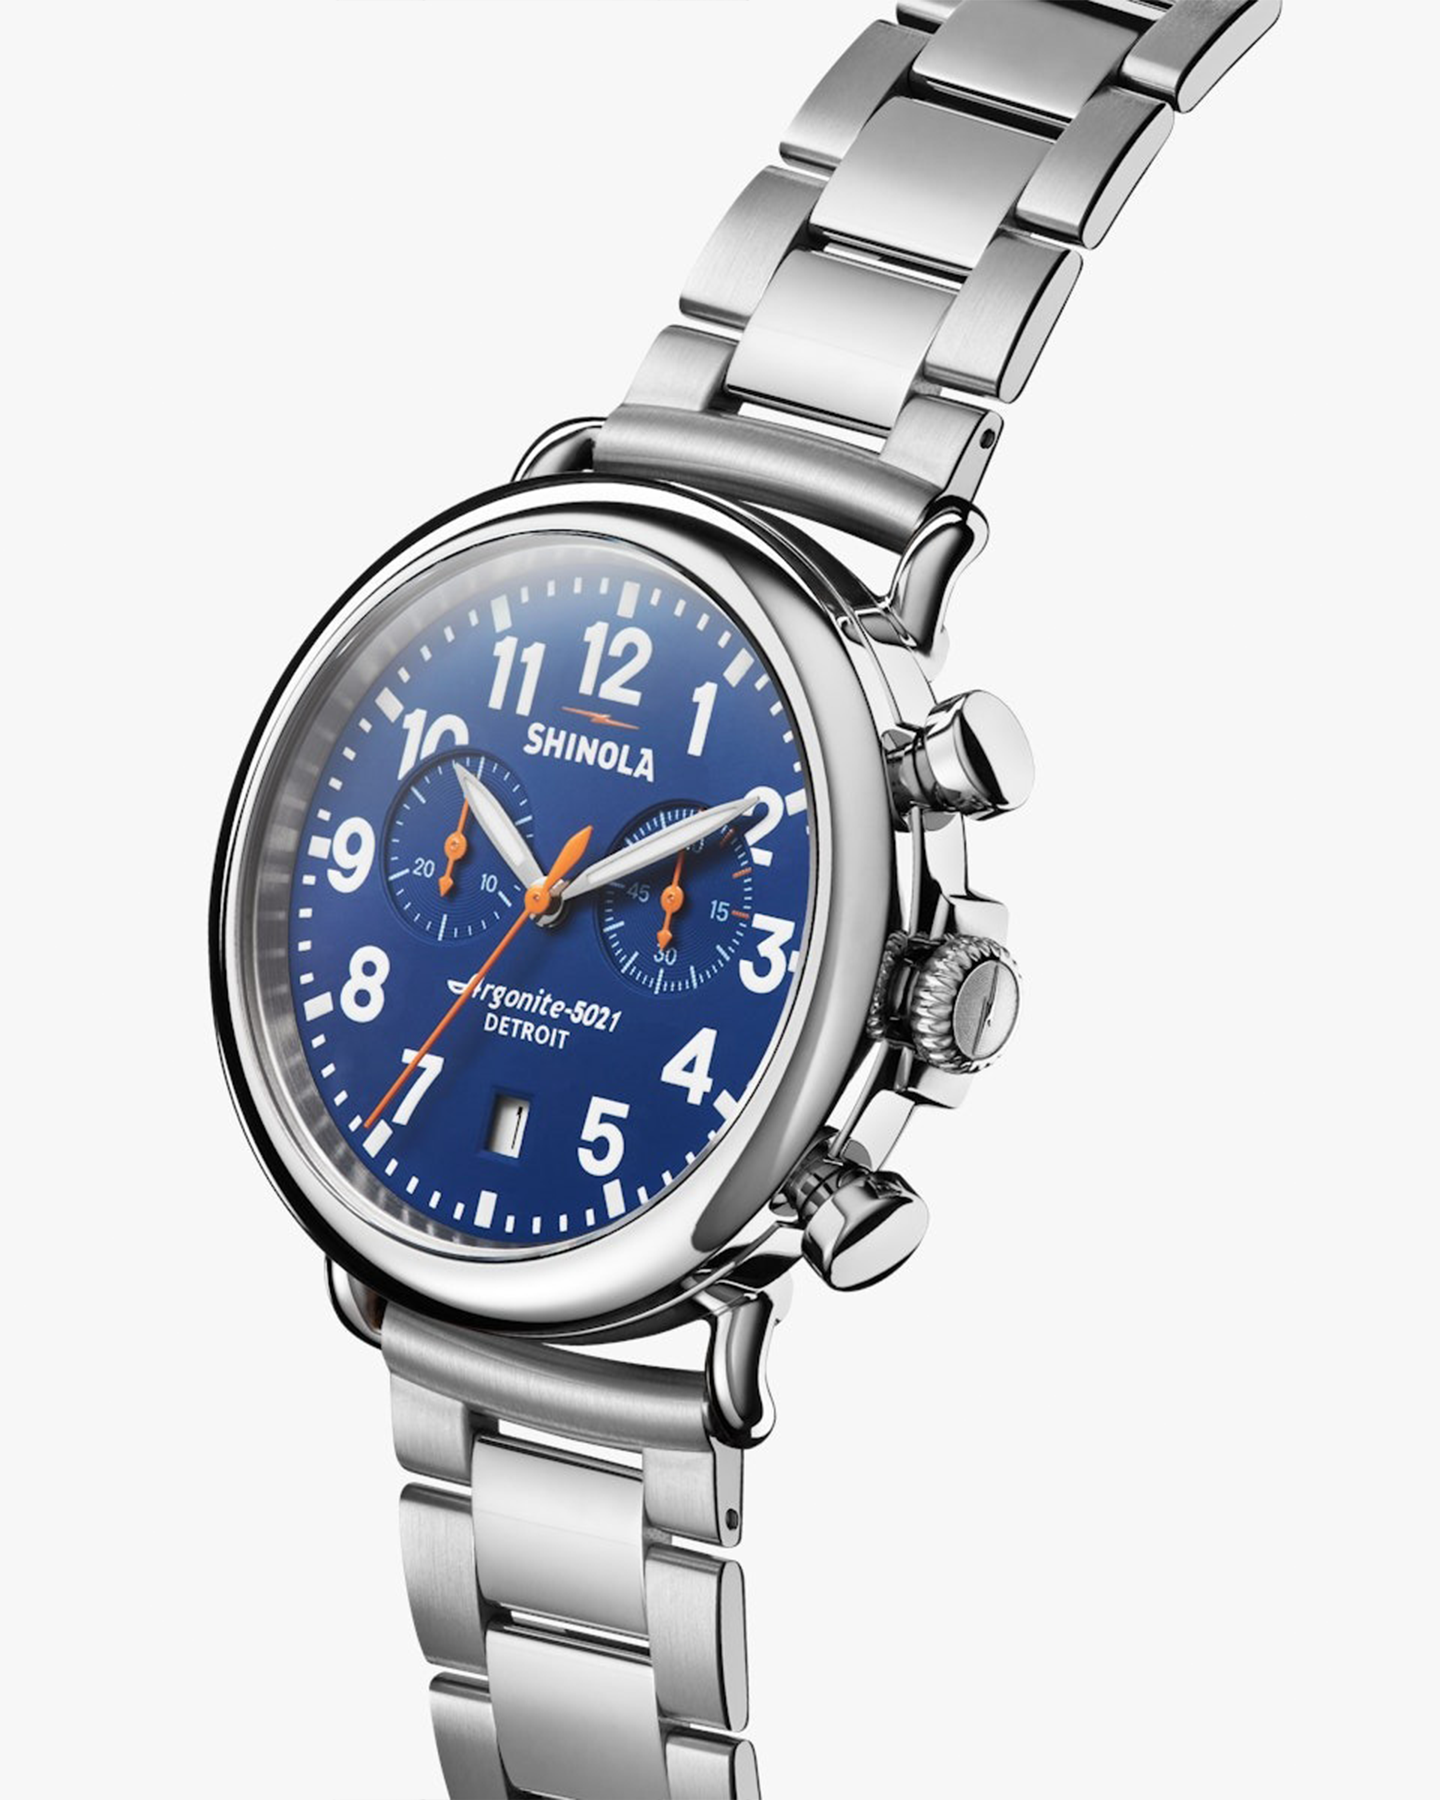 RUNWELL 2 EYE CHRONO 41MM WATCH WITH ROYAL BLUE FACE AND SILVER BRACELET